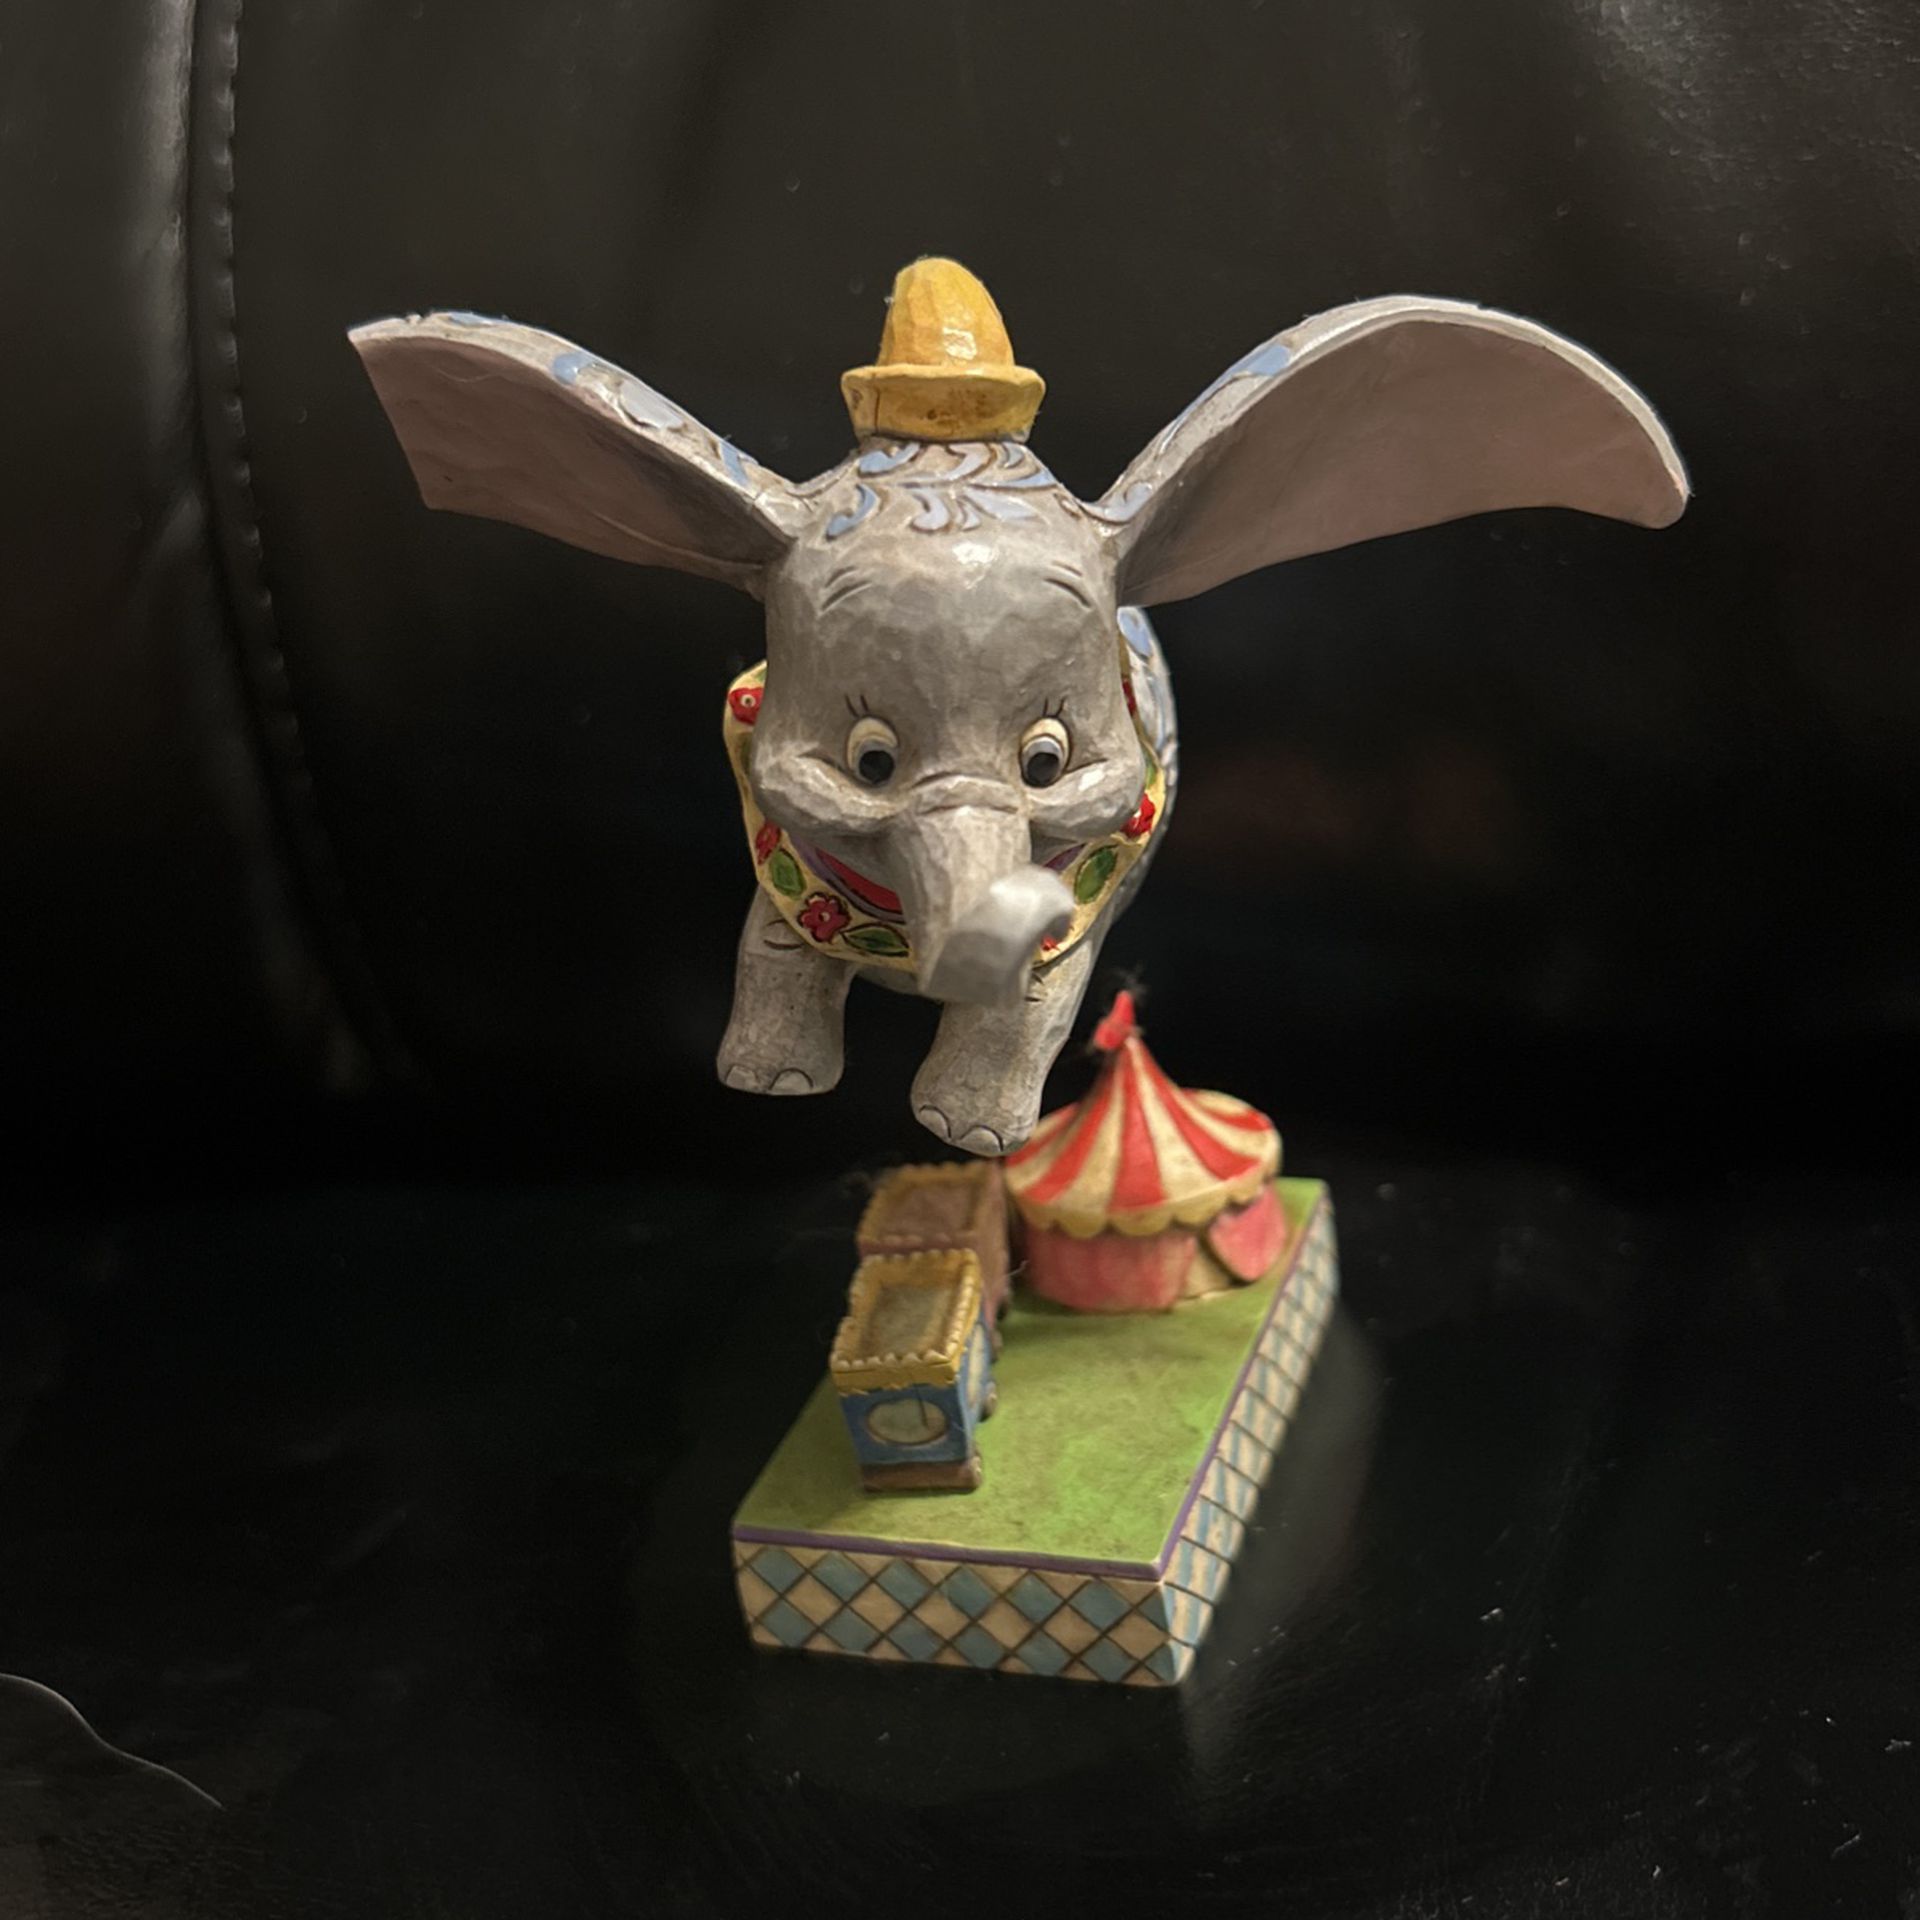 Disney Traditions Dumbo Faith In Flight Figurine (contact info removed) W/O Box 